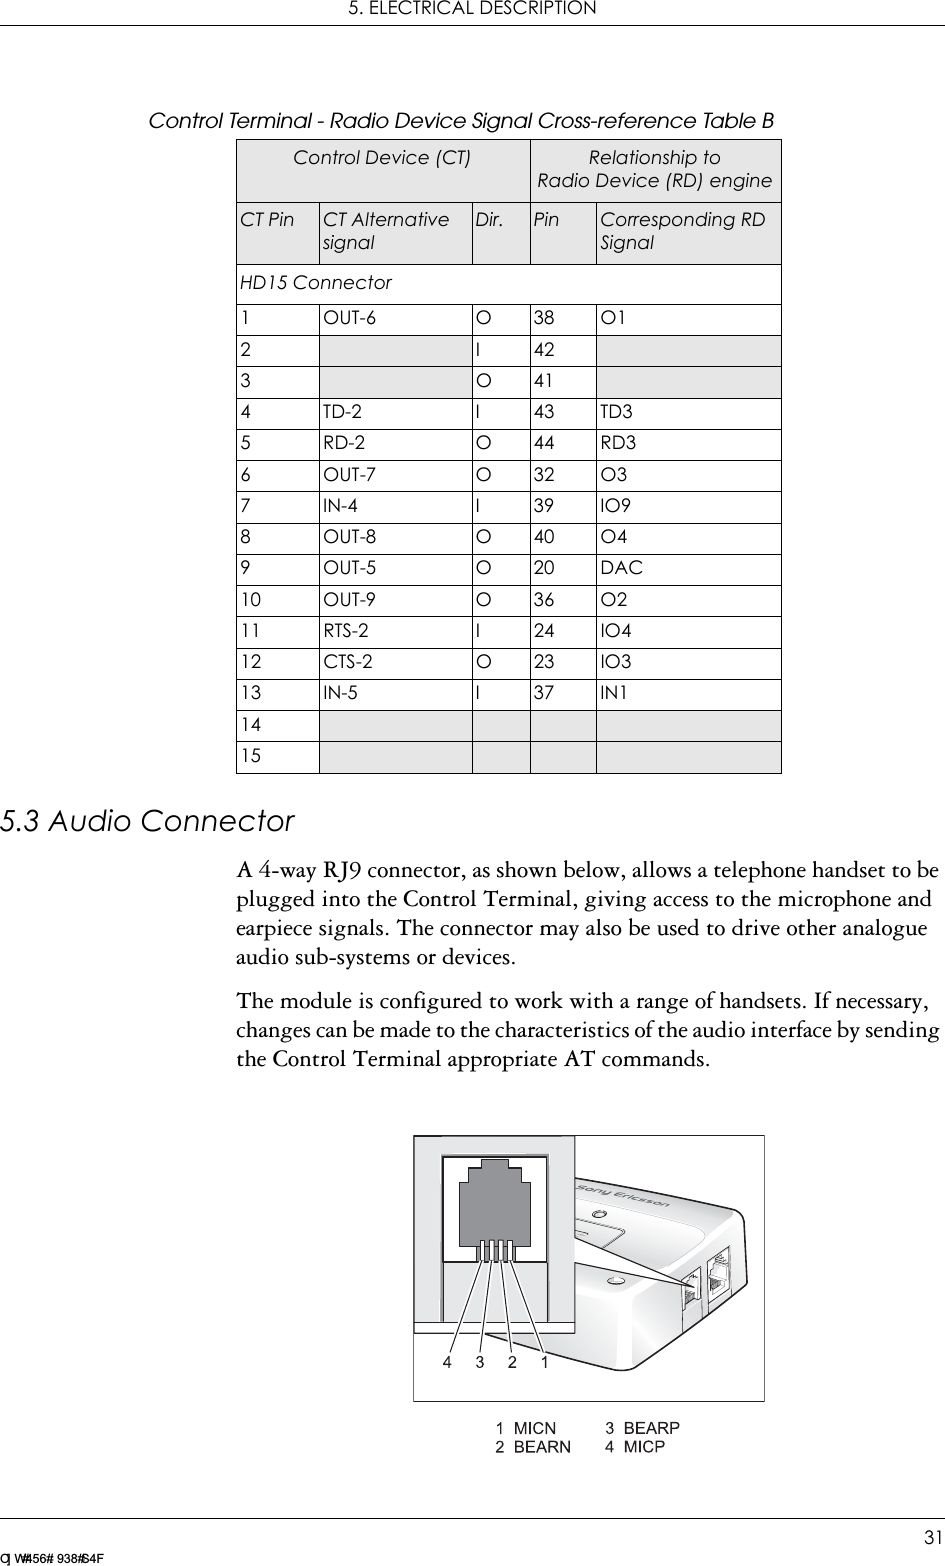 5. ELECTRICAL DESCRIPTION31LZ T 123 7605 P1CControl Terminal - Radio Device Signal Cross-reference Table B5.3 Audio ConnectorA 4-way RJ9 connector, as shown below, allows a telephone handset to be plugged into the Control Terminal, giving access to the microphone and earpiece signals. The connector may also be used to drive other analogue audio sub-systems or devices.The module is configured to work with a range of handsets. If necessary, changes can be made to the characteristics of the audio interface by sending the Control Terminal appropriate AT commands.Control Device (CT) Relationship to Radio Device (RD) engineCT Pin CT Alternative signal Dir. Pin Corresponding RD SignalHD15 Connector1OUT-6 O38O12I423O414TD-2 I43TD35RD-2 O44RD36OUT-7 O32O37IN-4 I39IO98OUT-8 O40O49OUT-5 O20DAC10 OUT-9 O 36 O211 RTS-2 I 24 IO412 CTS-2 O 23 IO313 IN-5 I 37 IN11415